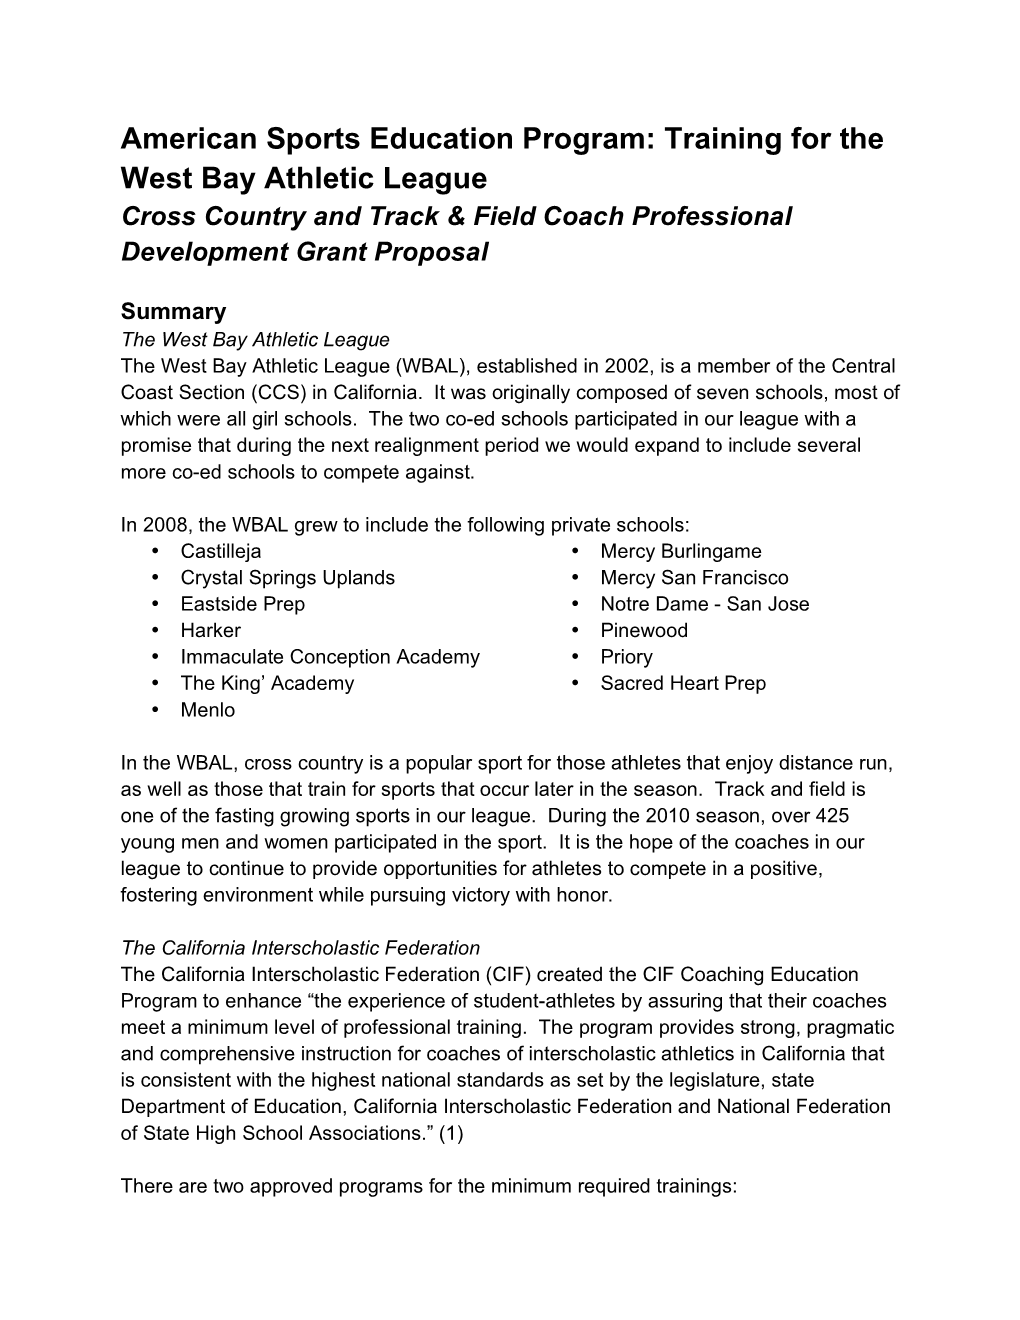 Training for the West Bay Athletic League Cross Country and Track & Field Coach Professional Development Grant Proposal